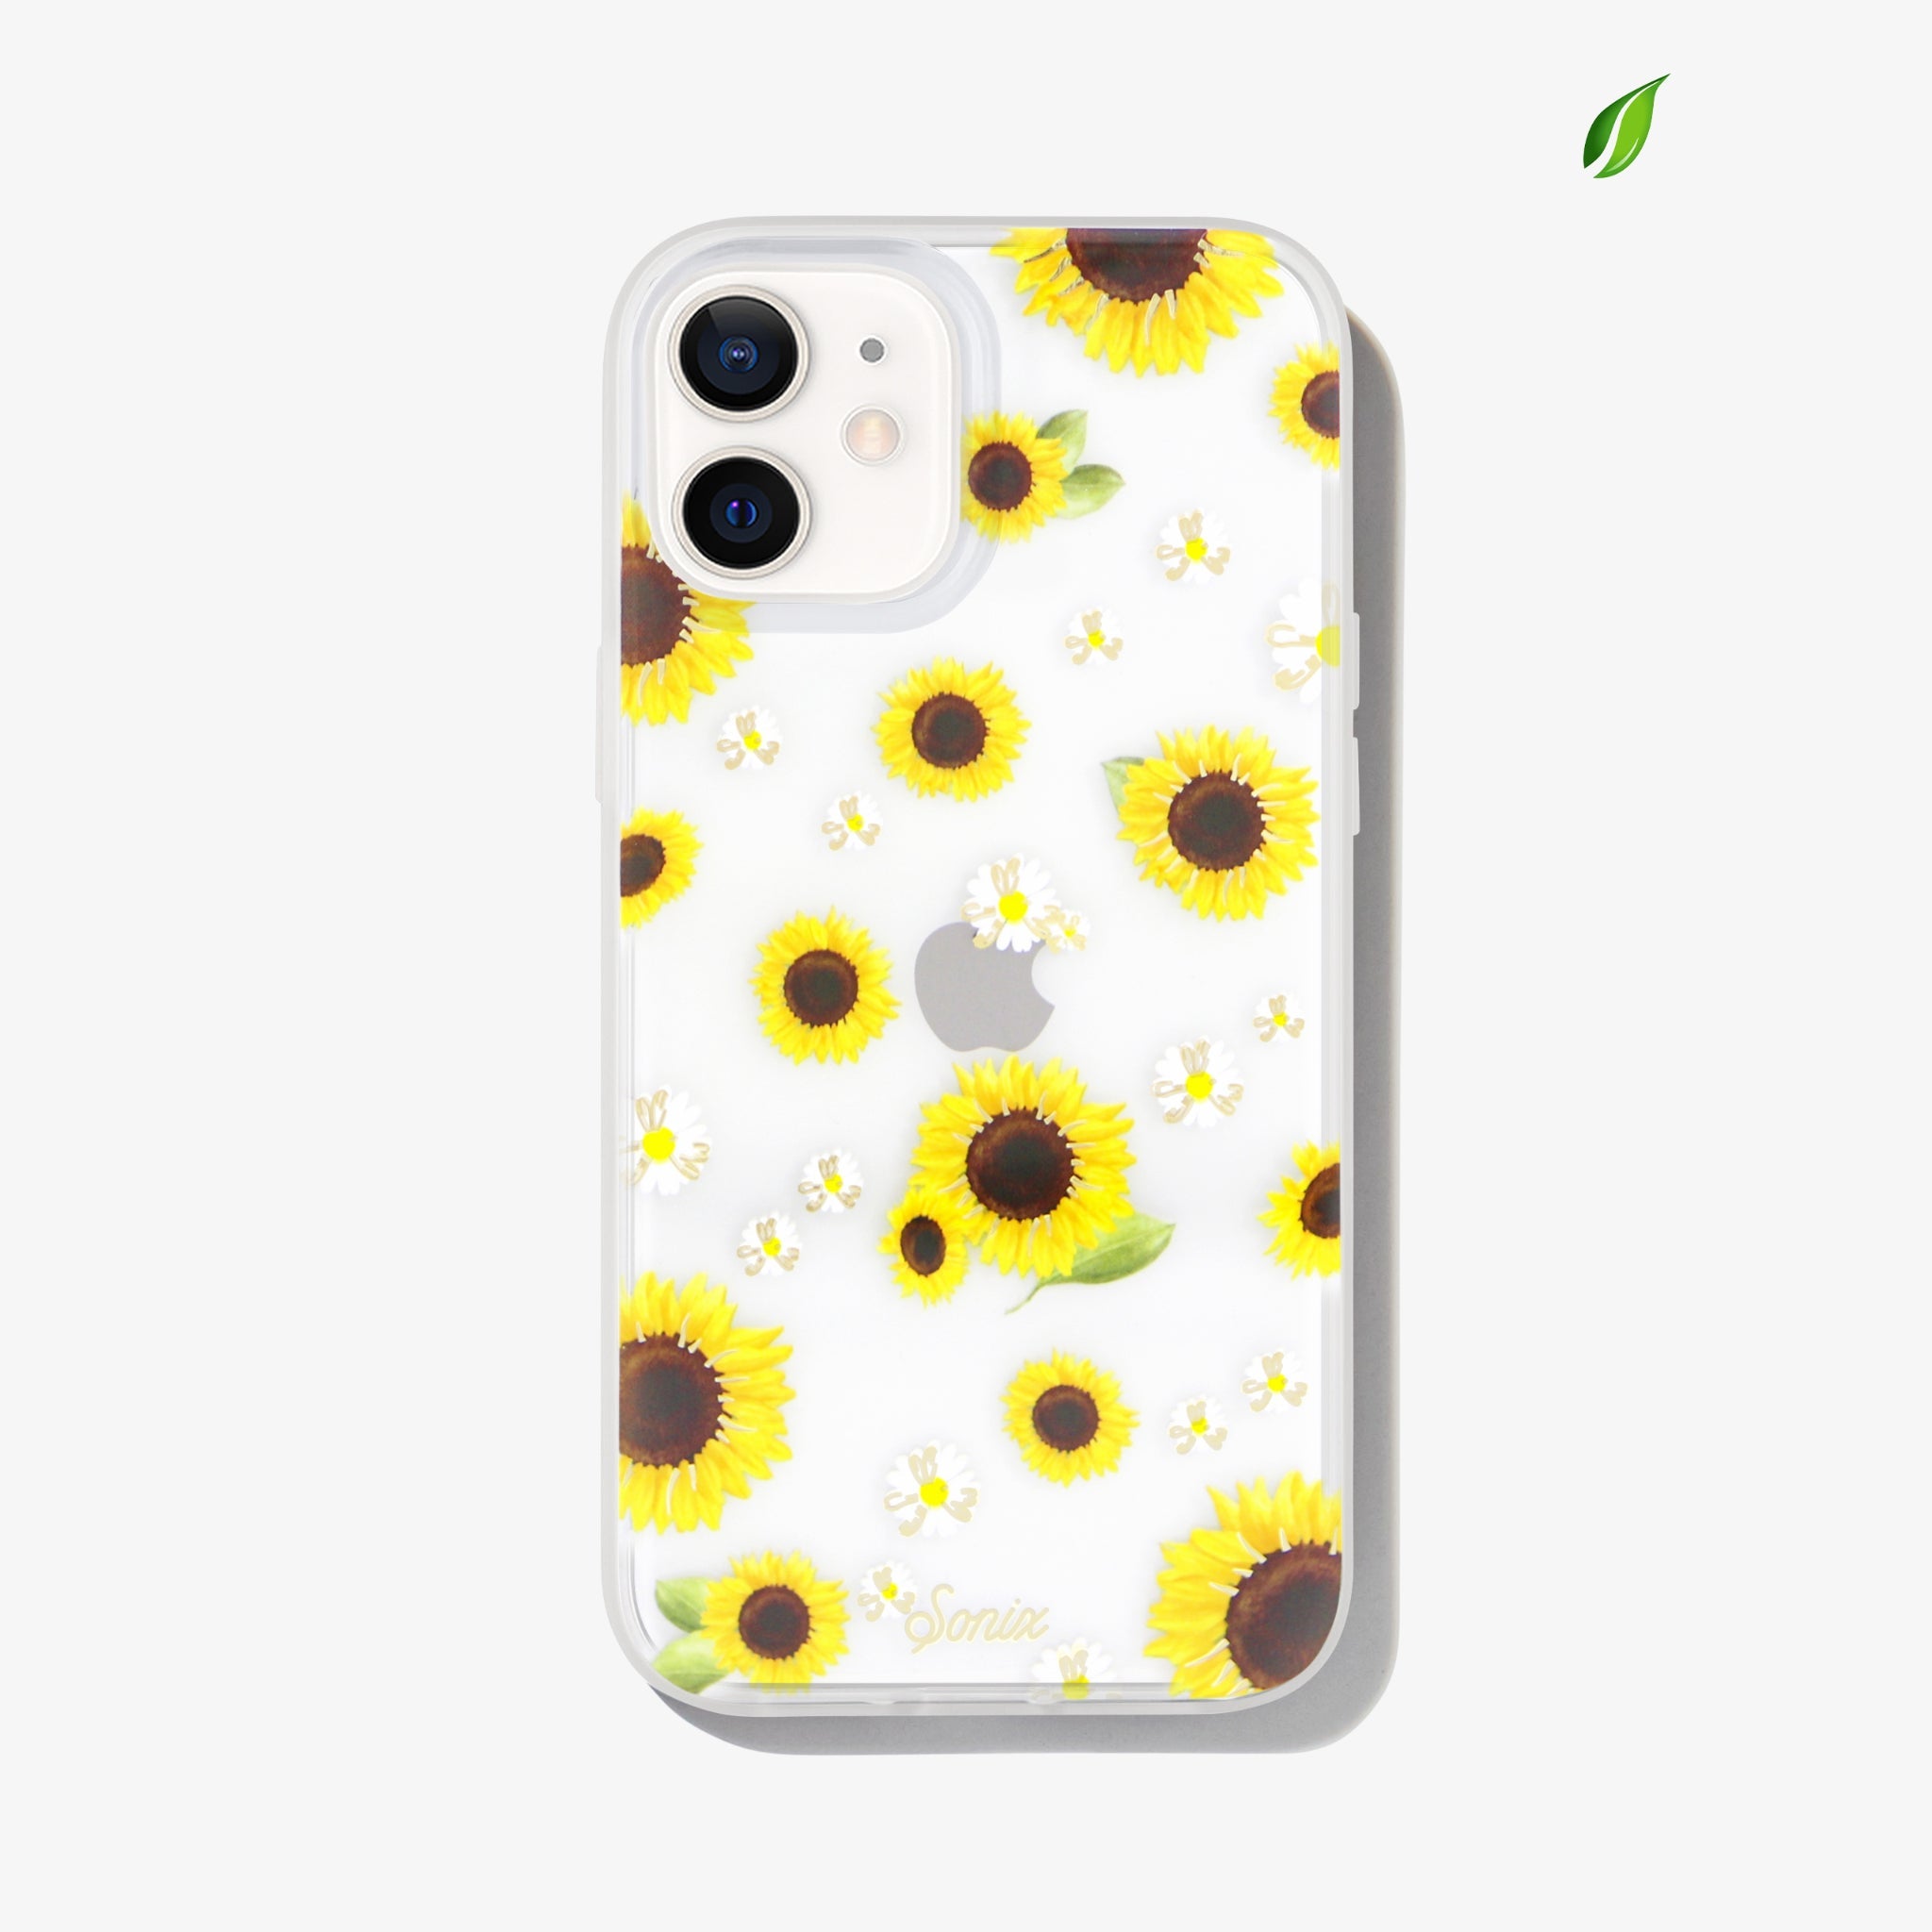 Yellow sunflower and white sunflower printed on a clear case modeled on a white iphone 12